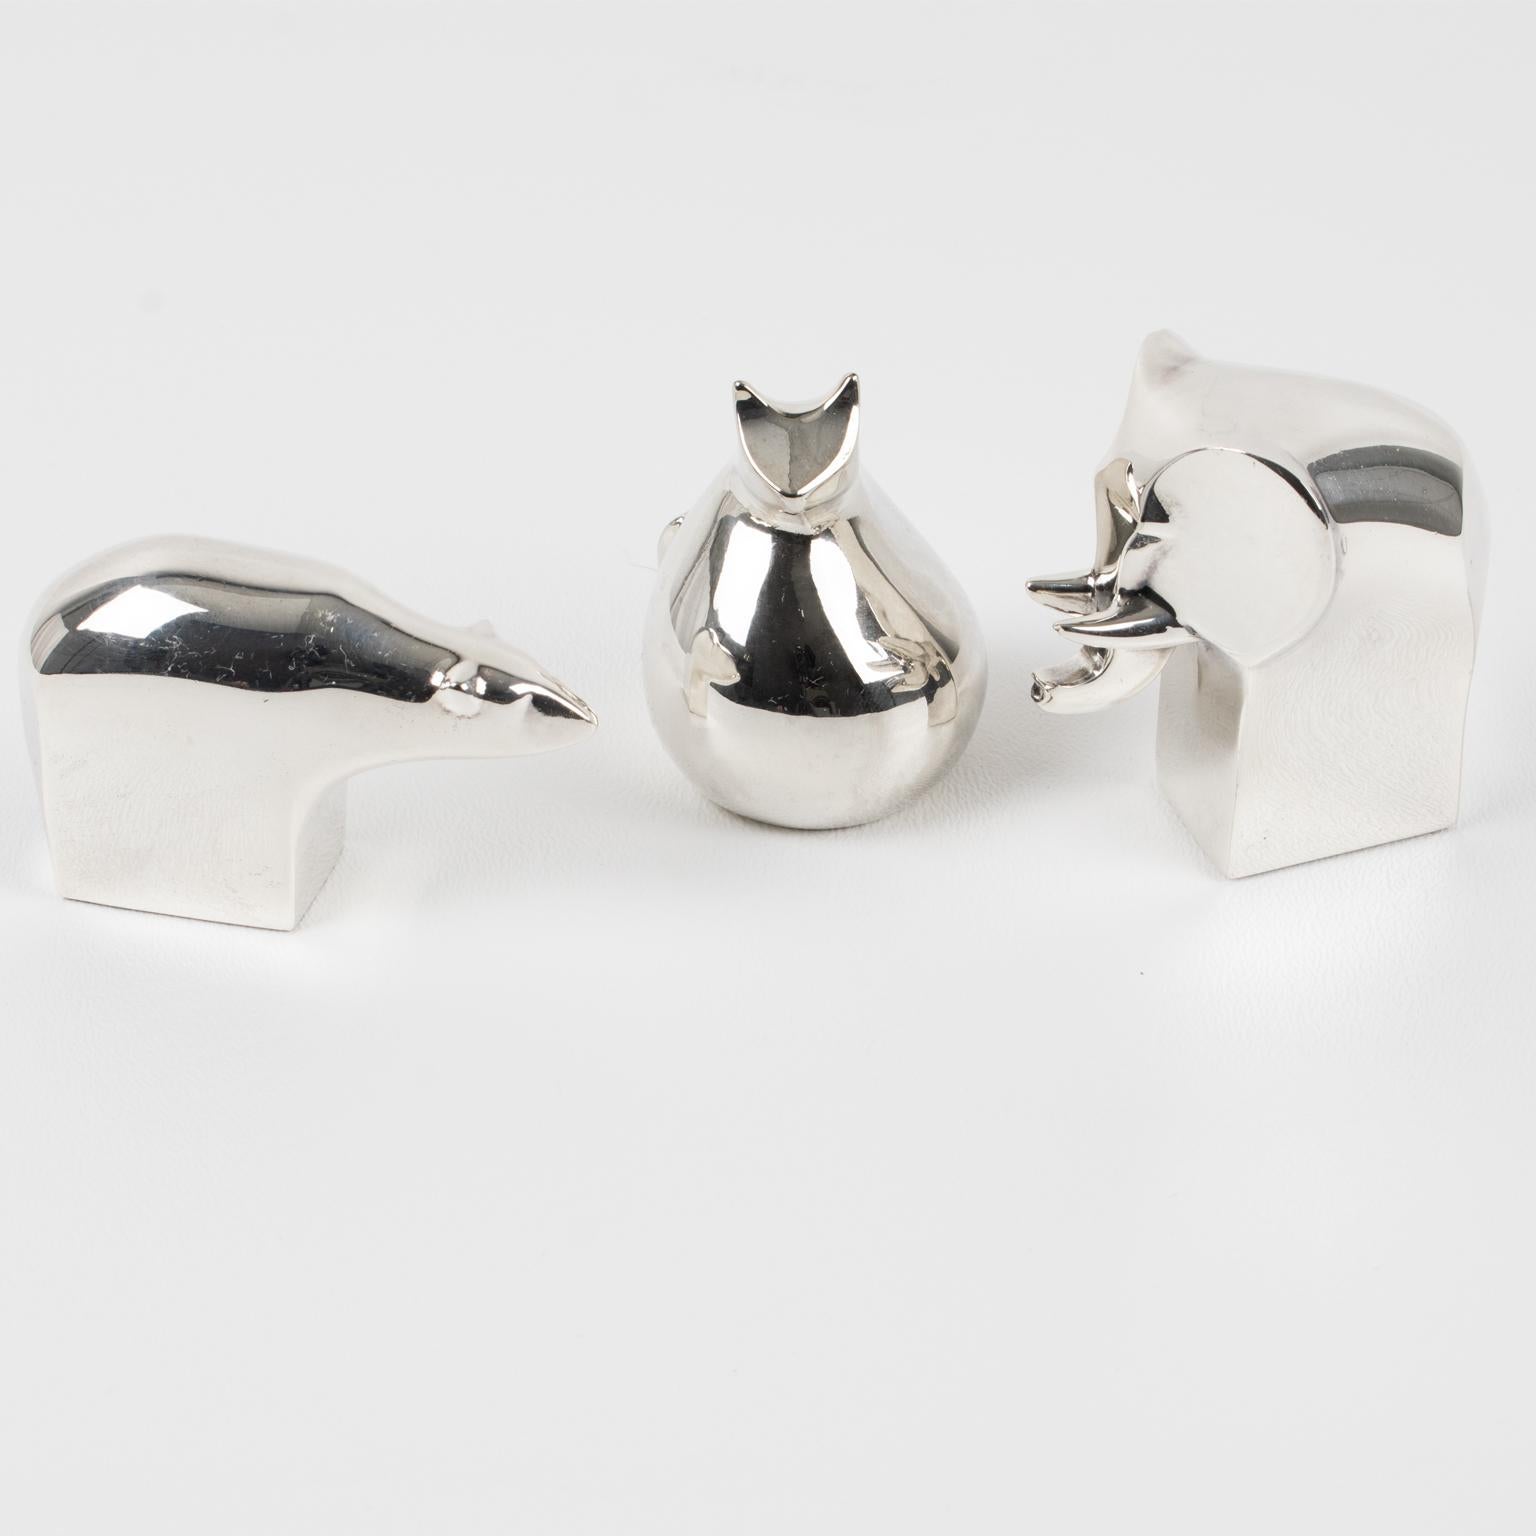 These decorative Scandinavian Mid-Century animal sculptures were created exclusively for Dansk Design in the early 1970s by world-renowned Swedish designer Gunnar Cyren. This gorgeous modernist set of three silver-plated figurines of a cat, an